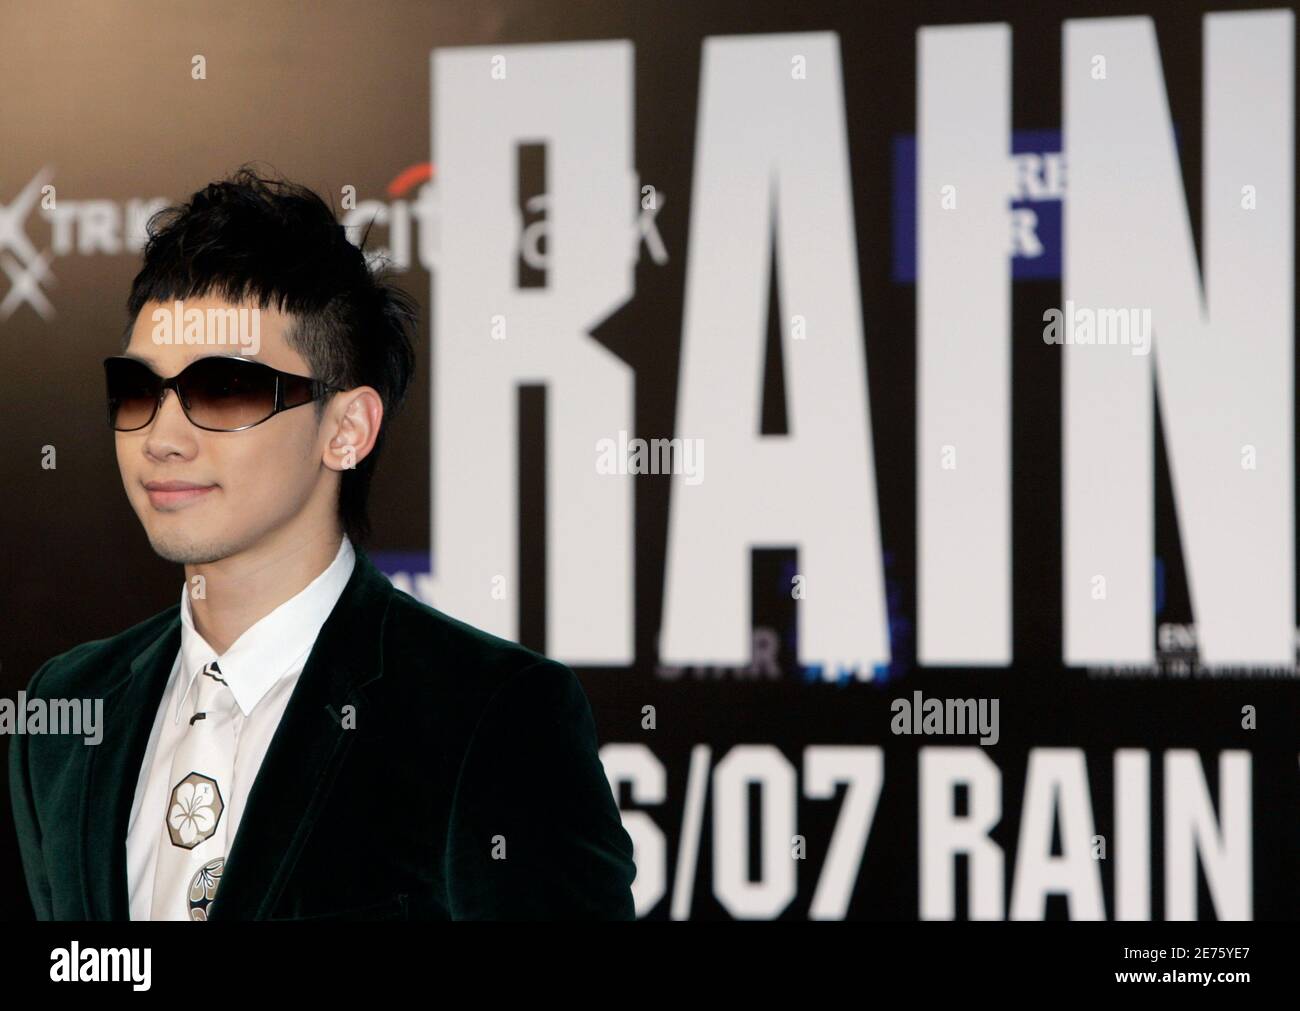 South Korean pop star Rain poses during a news conference in Hong Kong  January 10, 2007. Rain will perform three concerts in the city starting  Friday, the first stop in Asia for